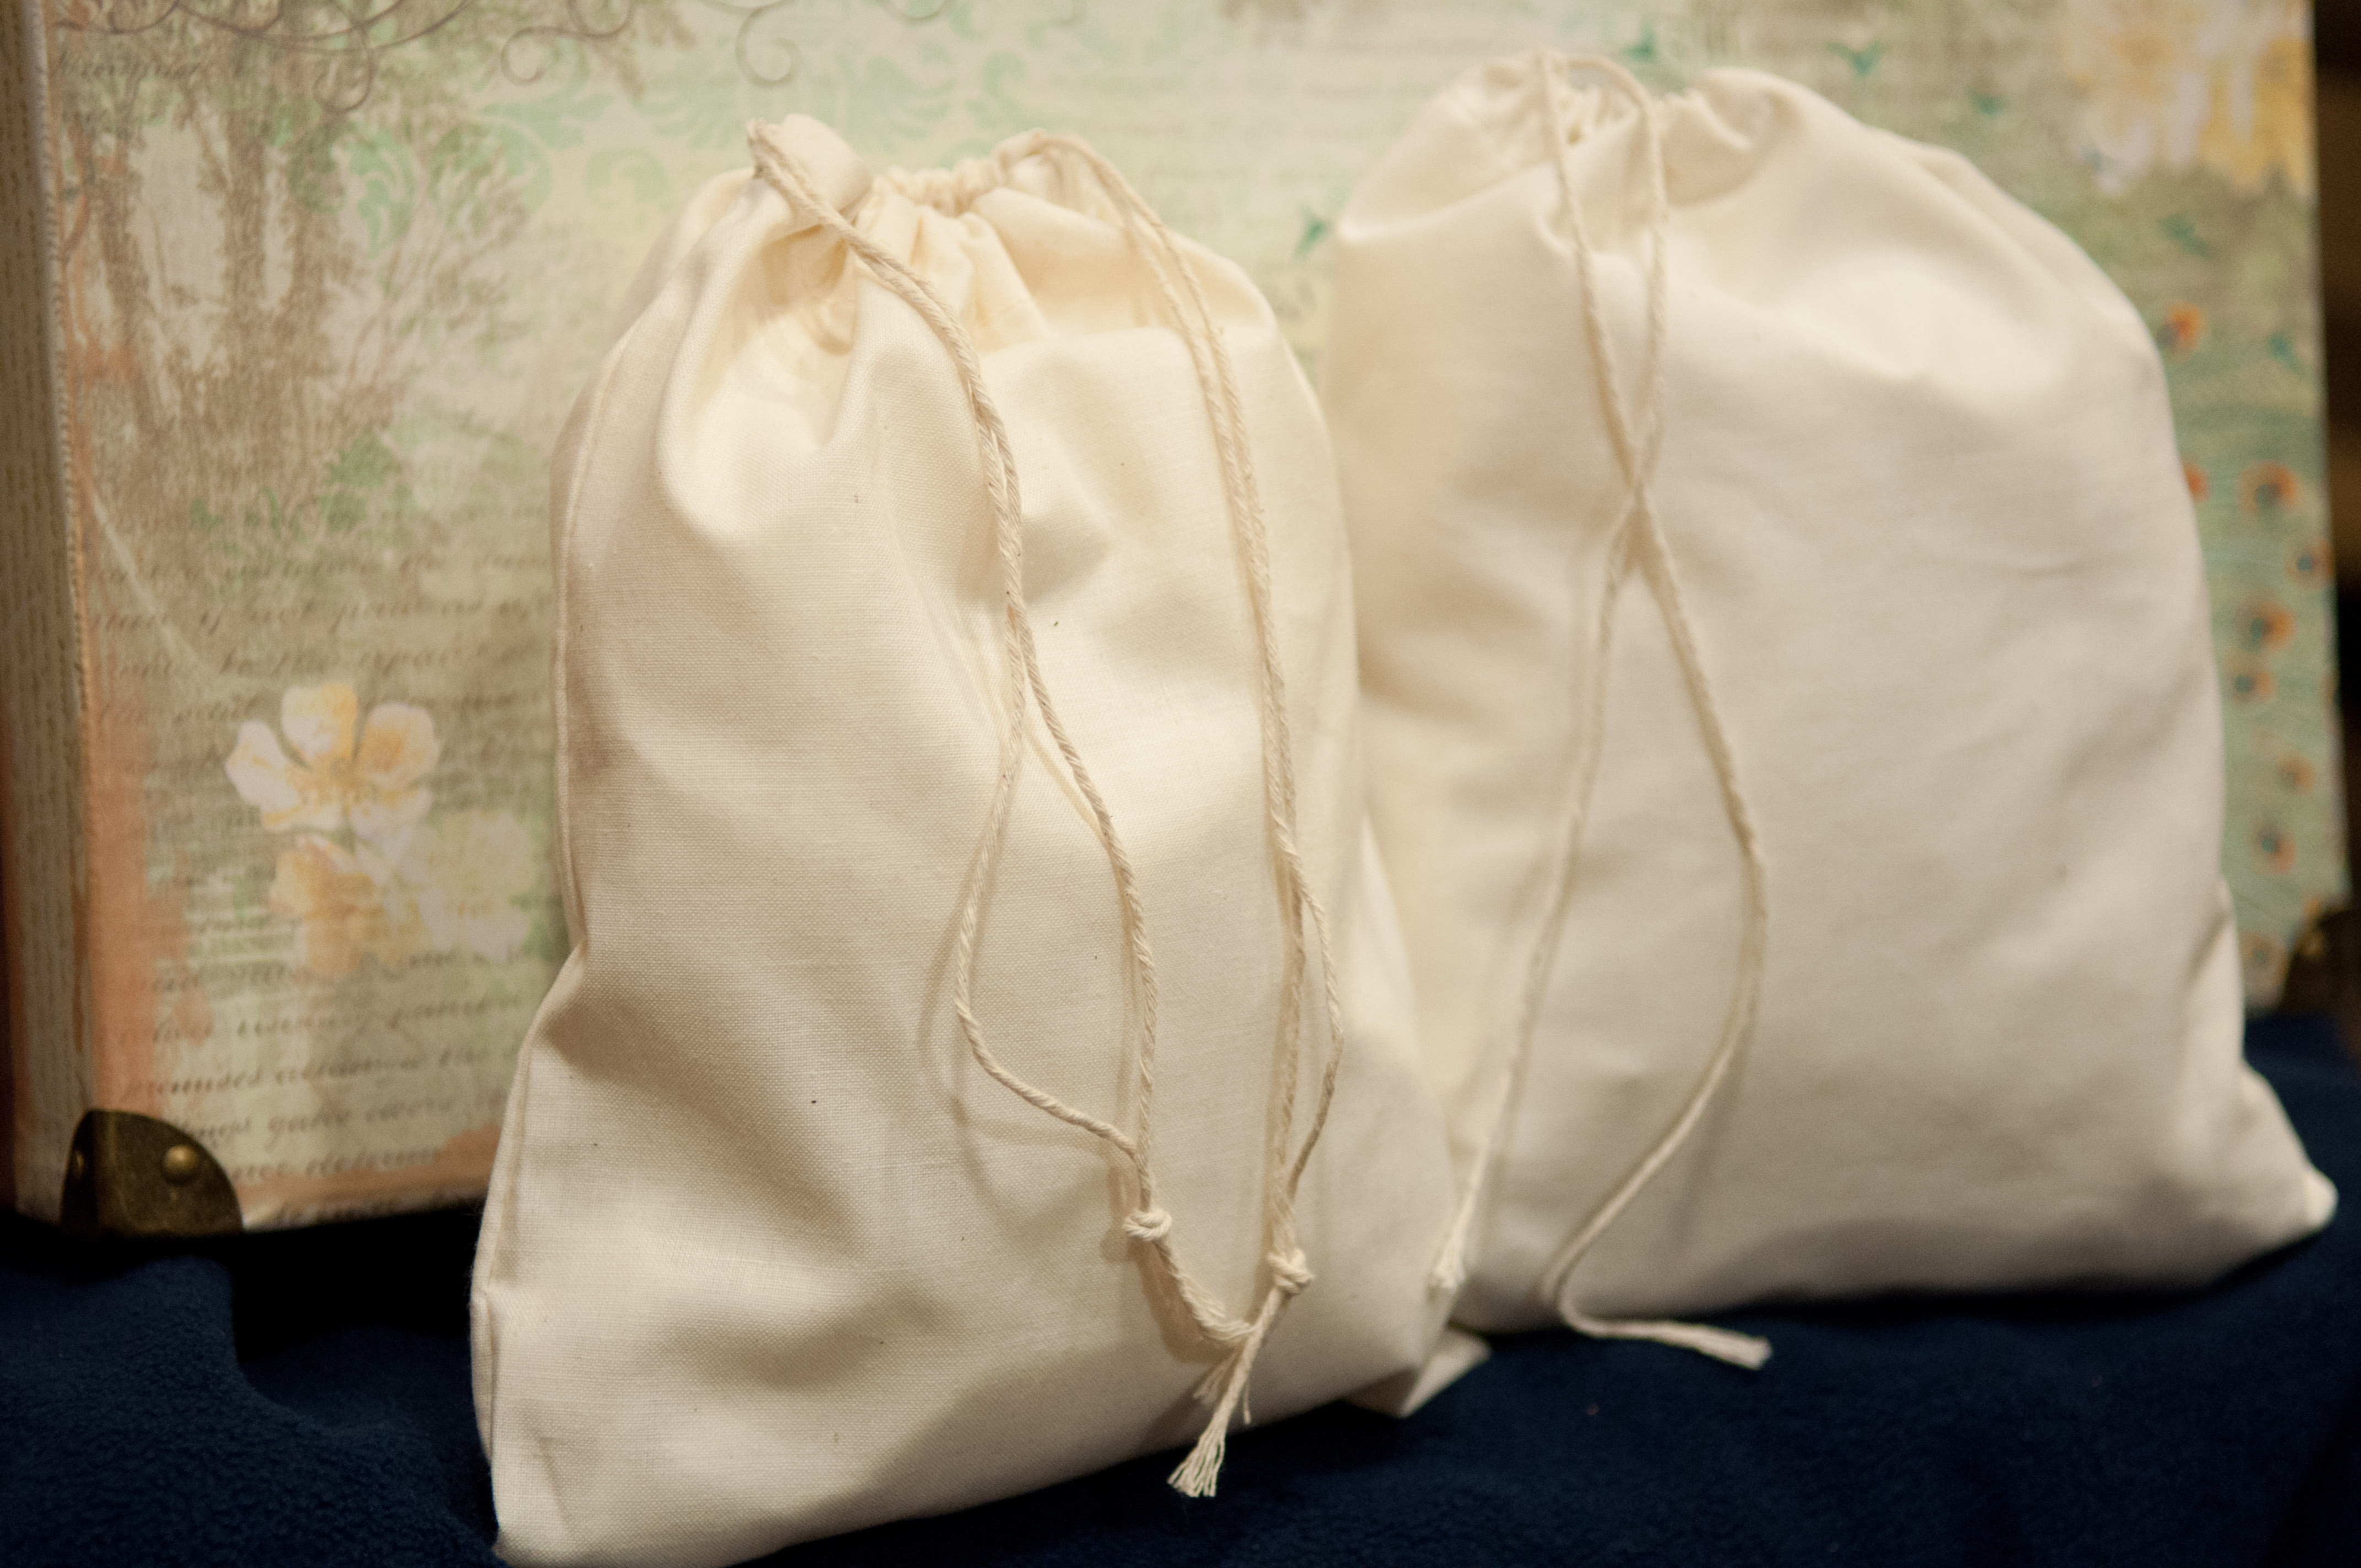 A Tool For Teaching: Cotton Muslin Bags Review with TJ Nguyen of the Auburn Society of Women Engineers